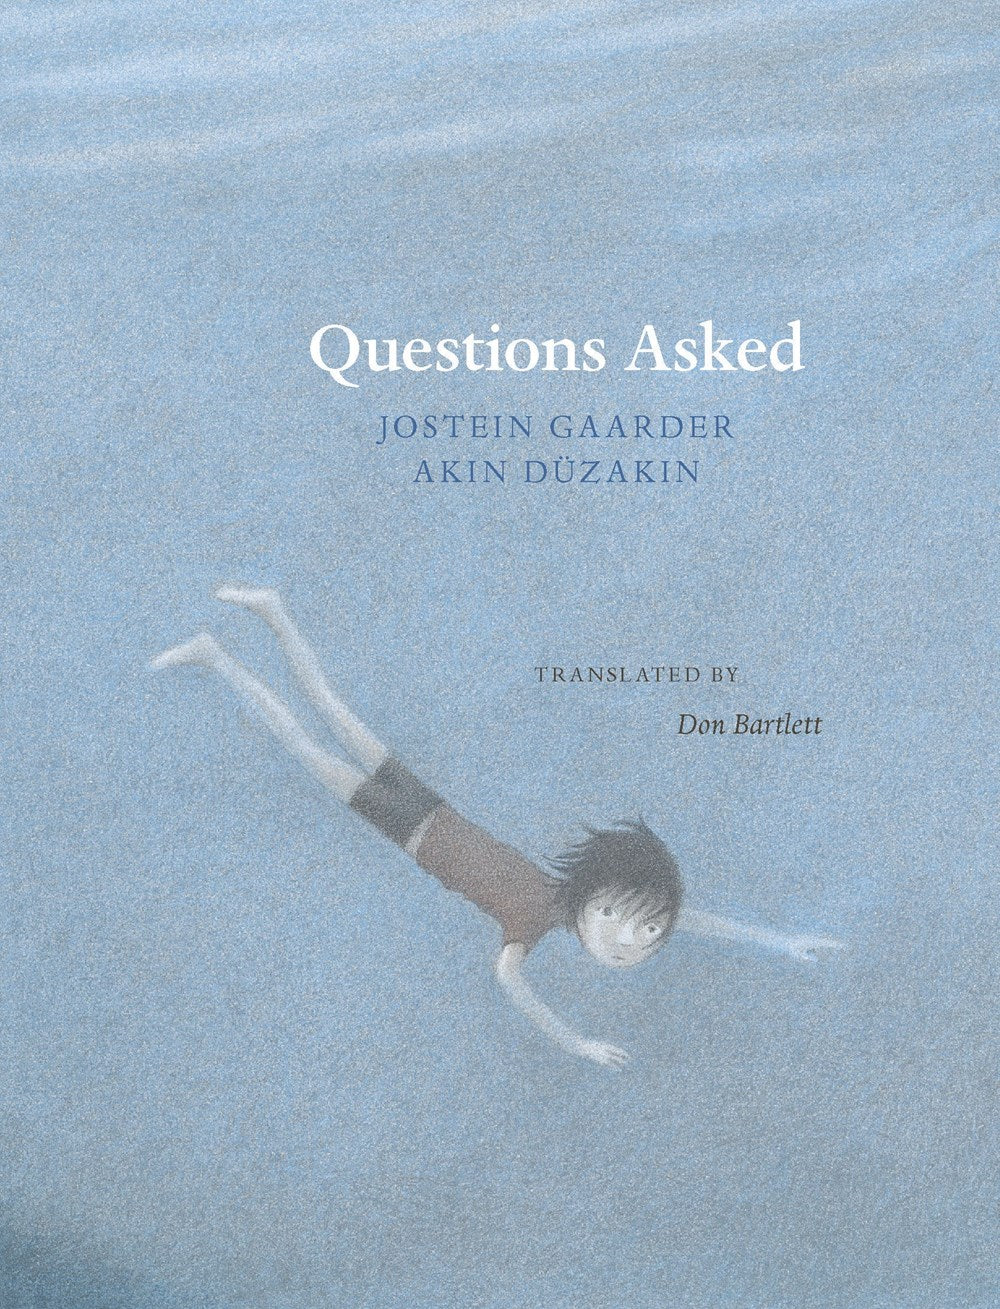 Questions Asked by Jostein Gaarder (Translated from the Norweigan by Don Bartlett)